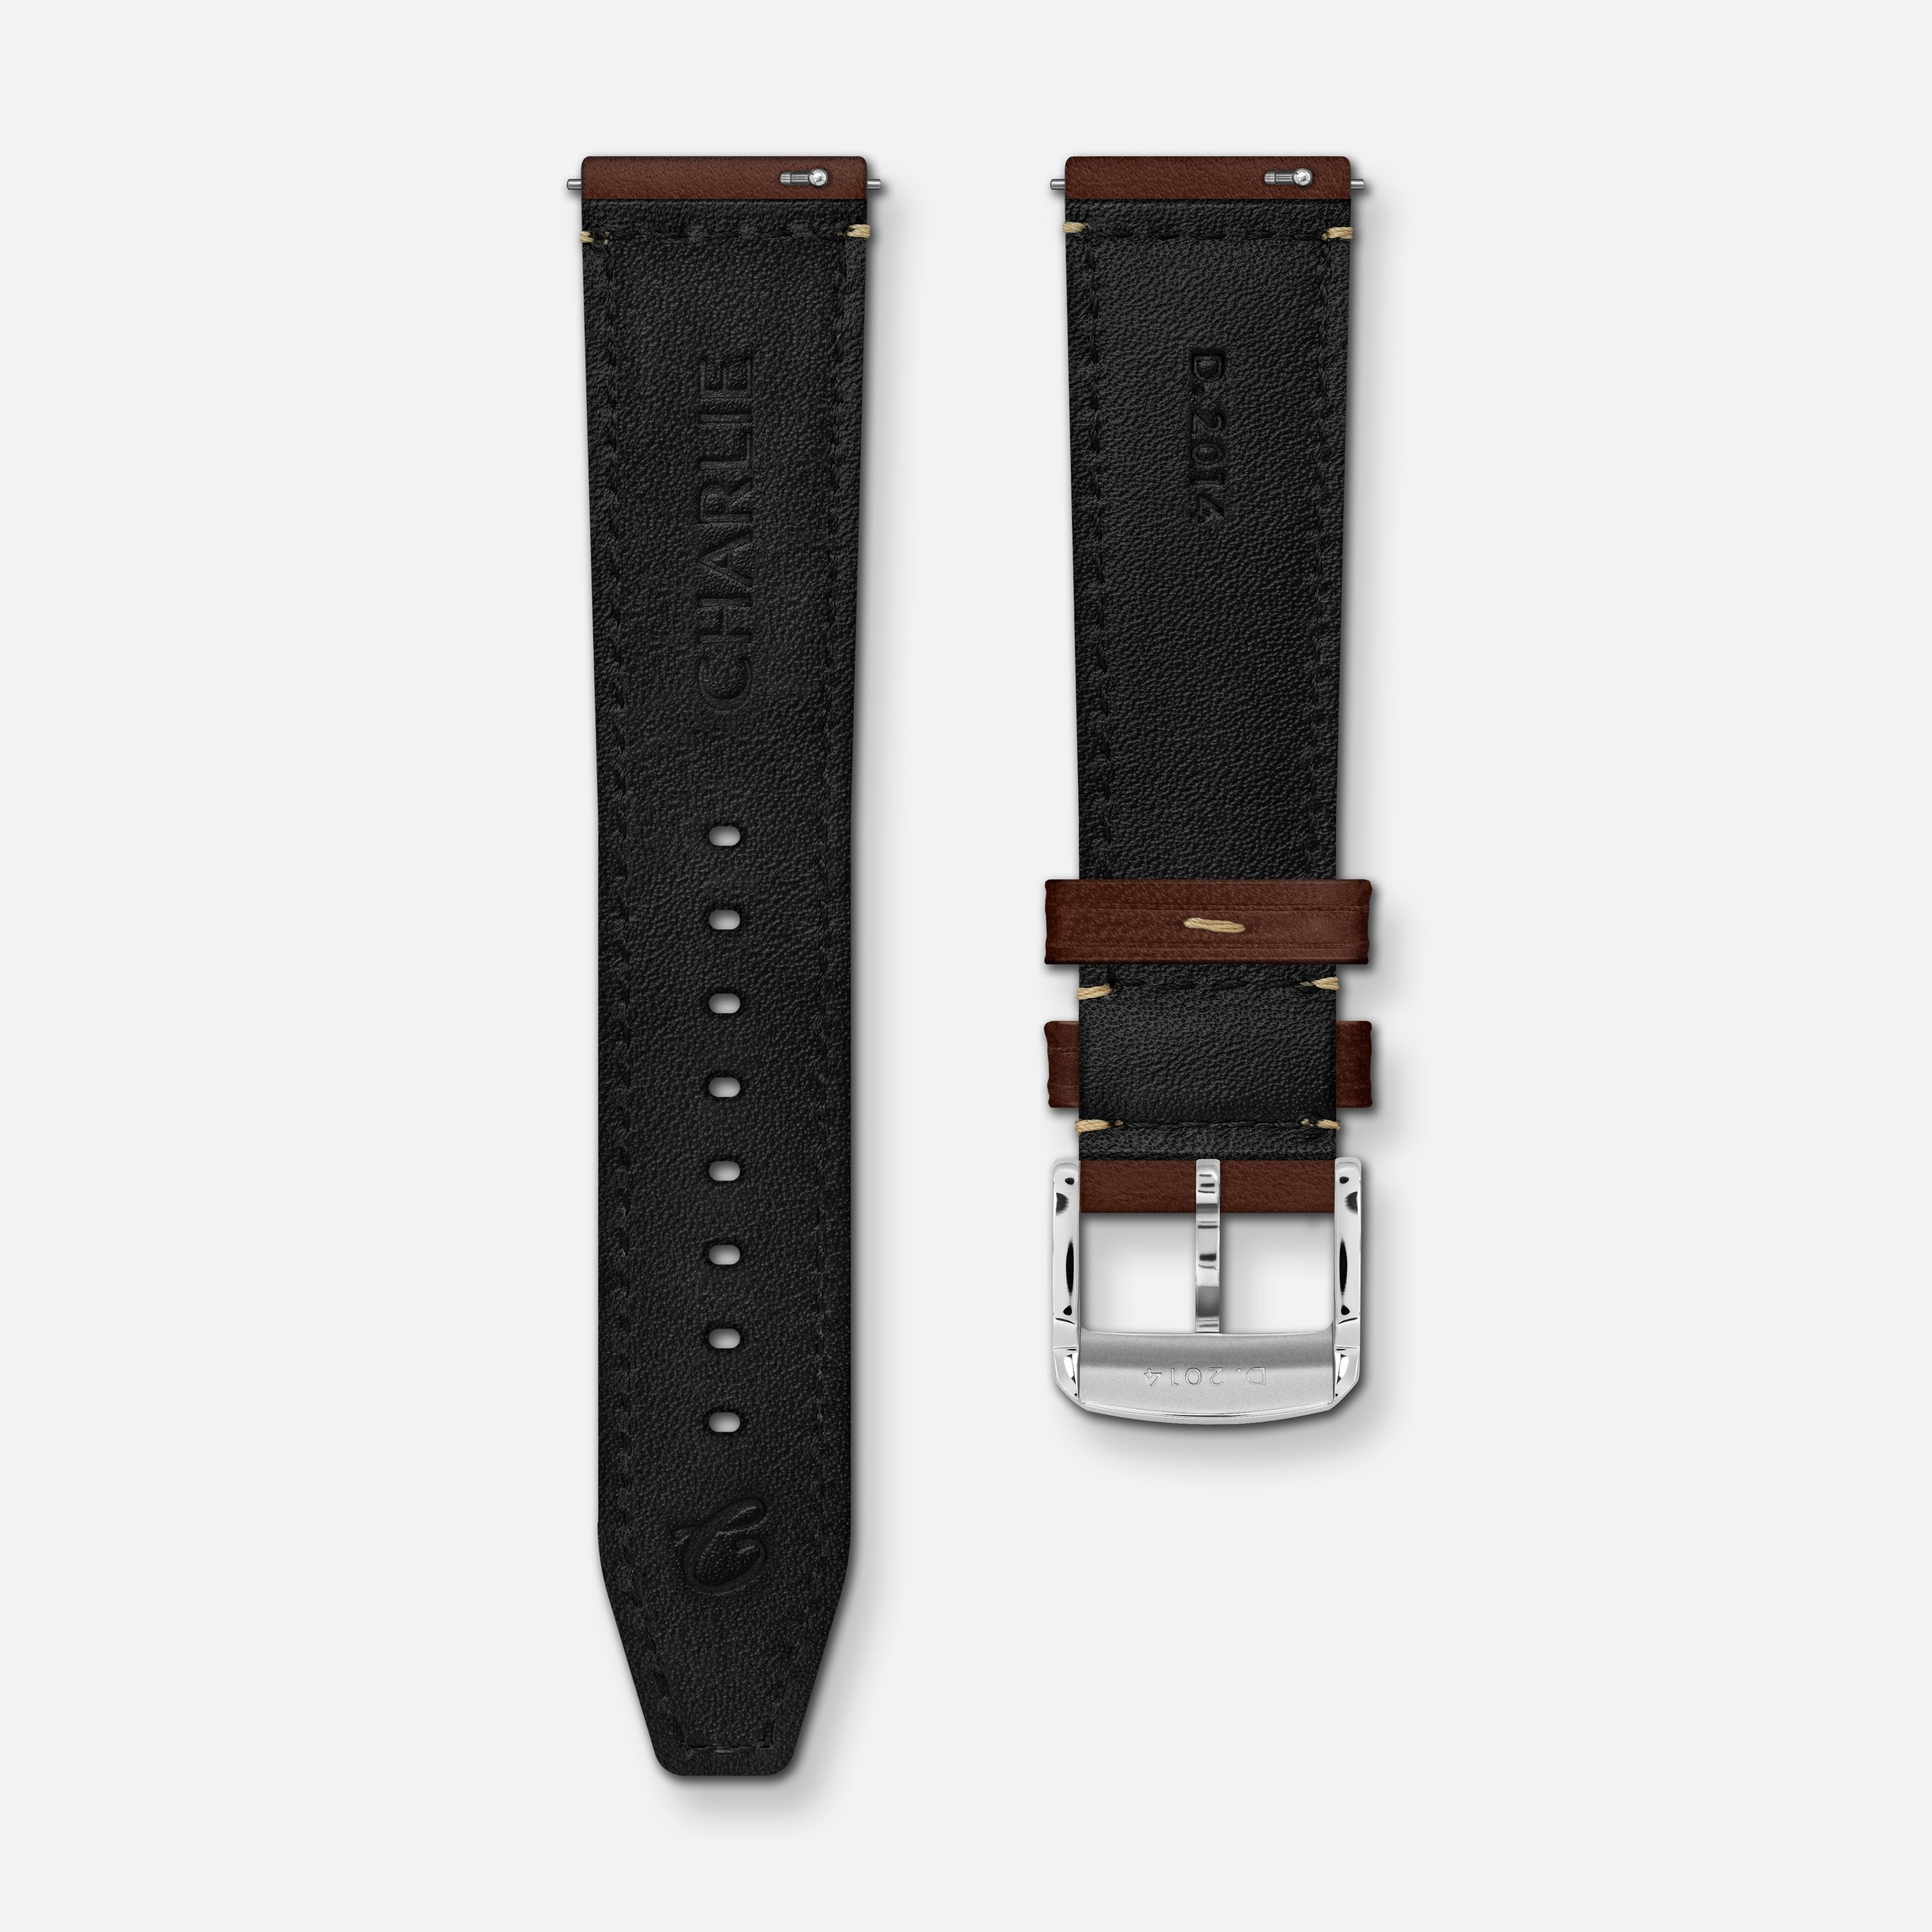 Chocolate EXP leather strap 20mm